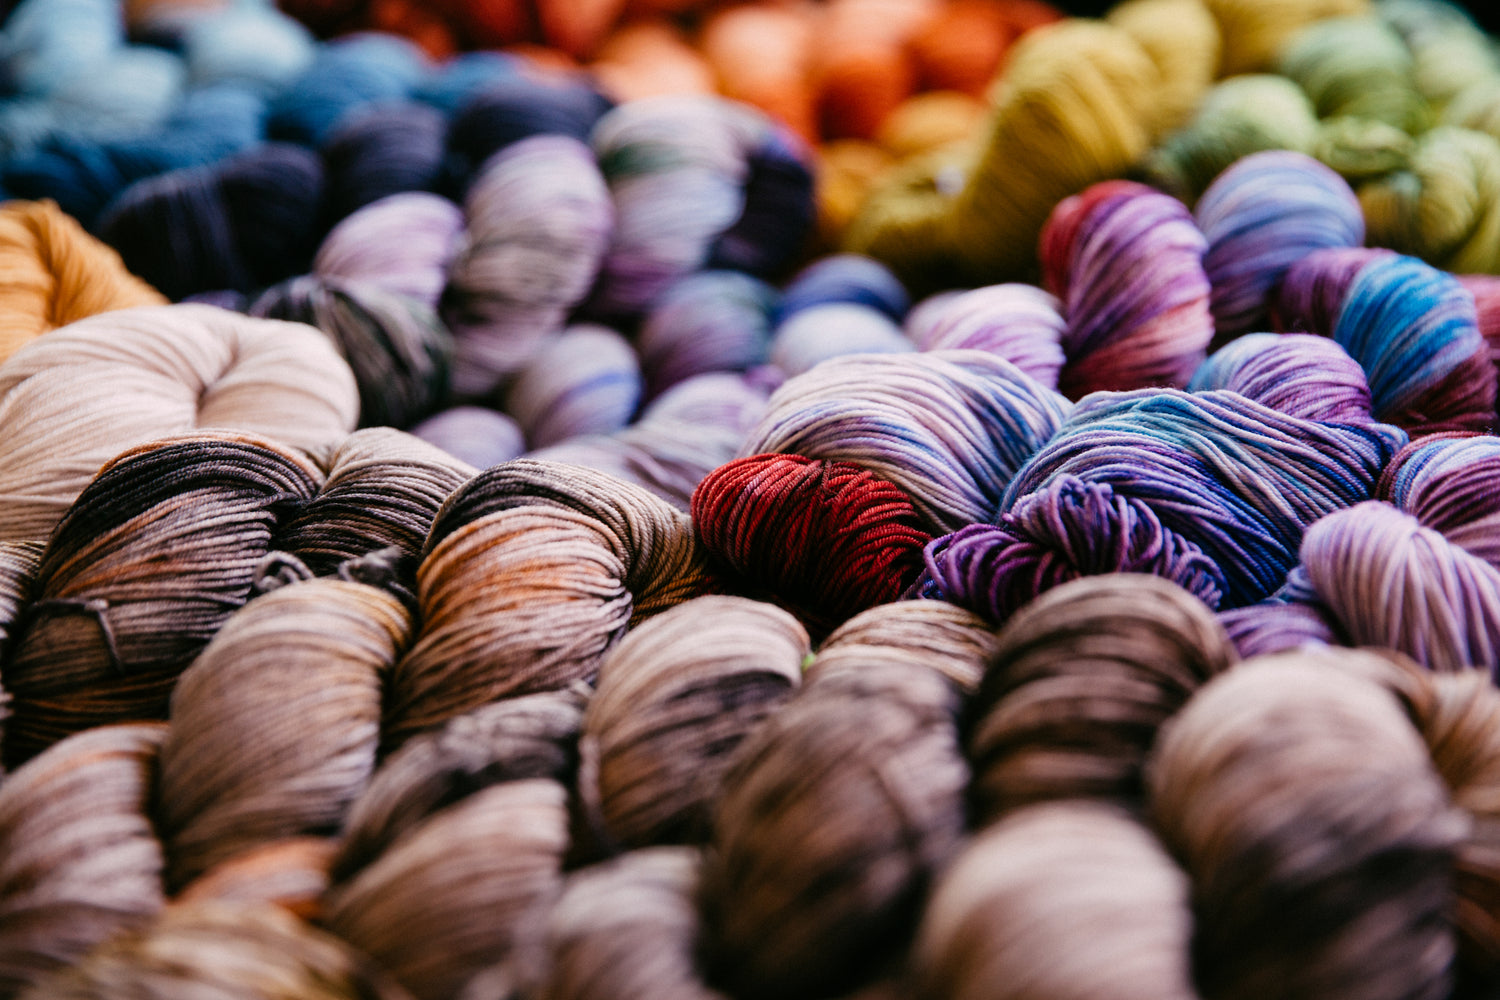 Wool Jeanie – Wool and Crafts – Buy yarn, wool, needles and other knitting  and crafting Supplies online with fast delivery